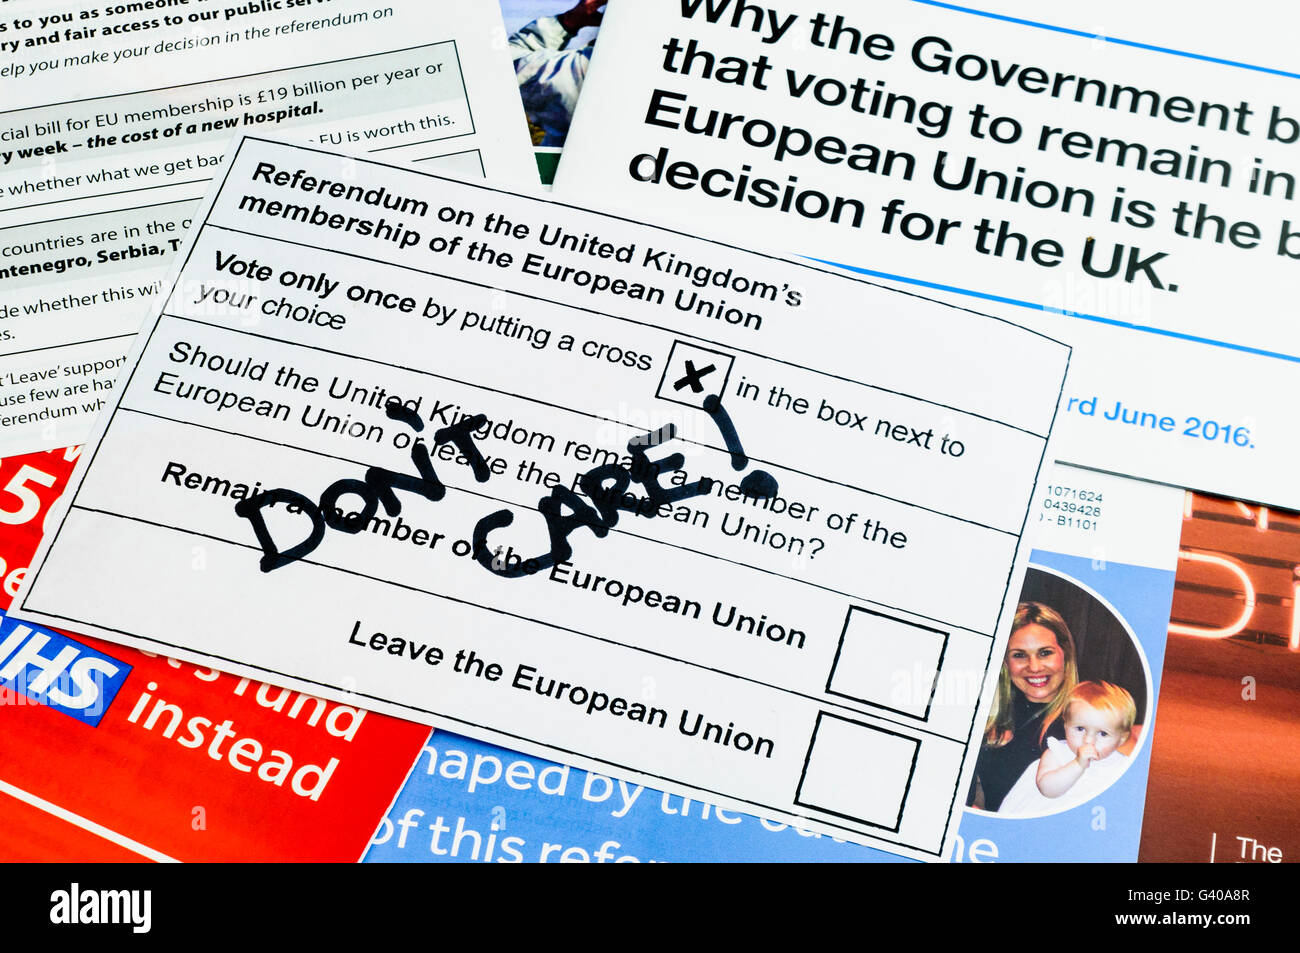 UK Referendum voting slip with 'Don't Care' written on it as a spoiled vote of apathy on top of campaign literature from both the 'leave' (Brexit) and 'remain' (Bremain) camps (mock voting slip) Stock Photo